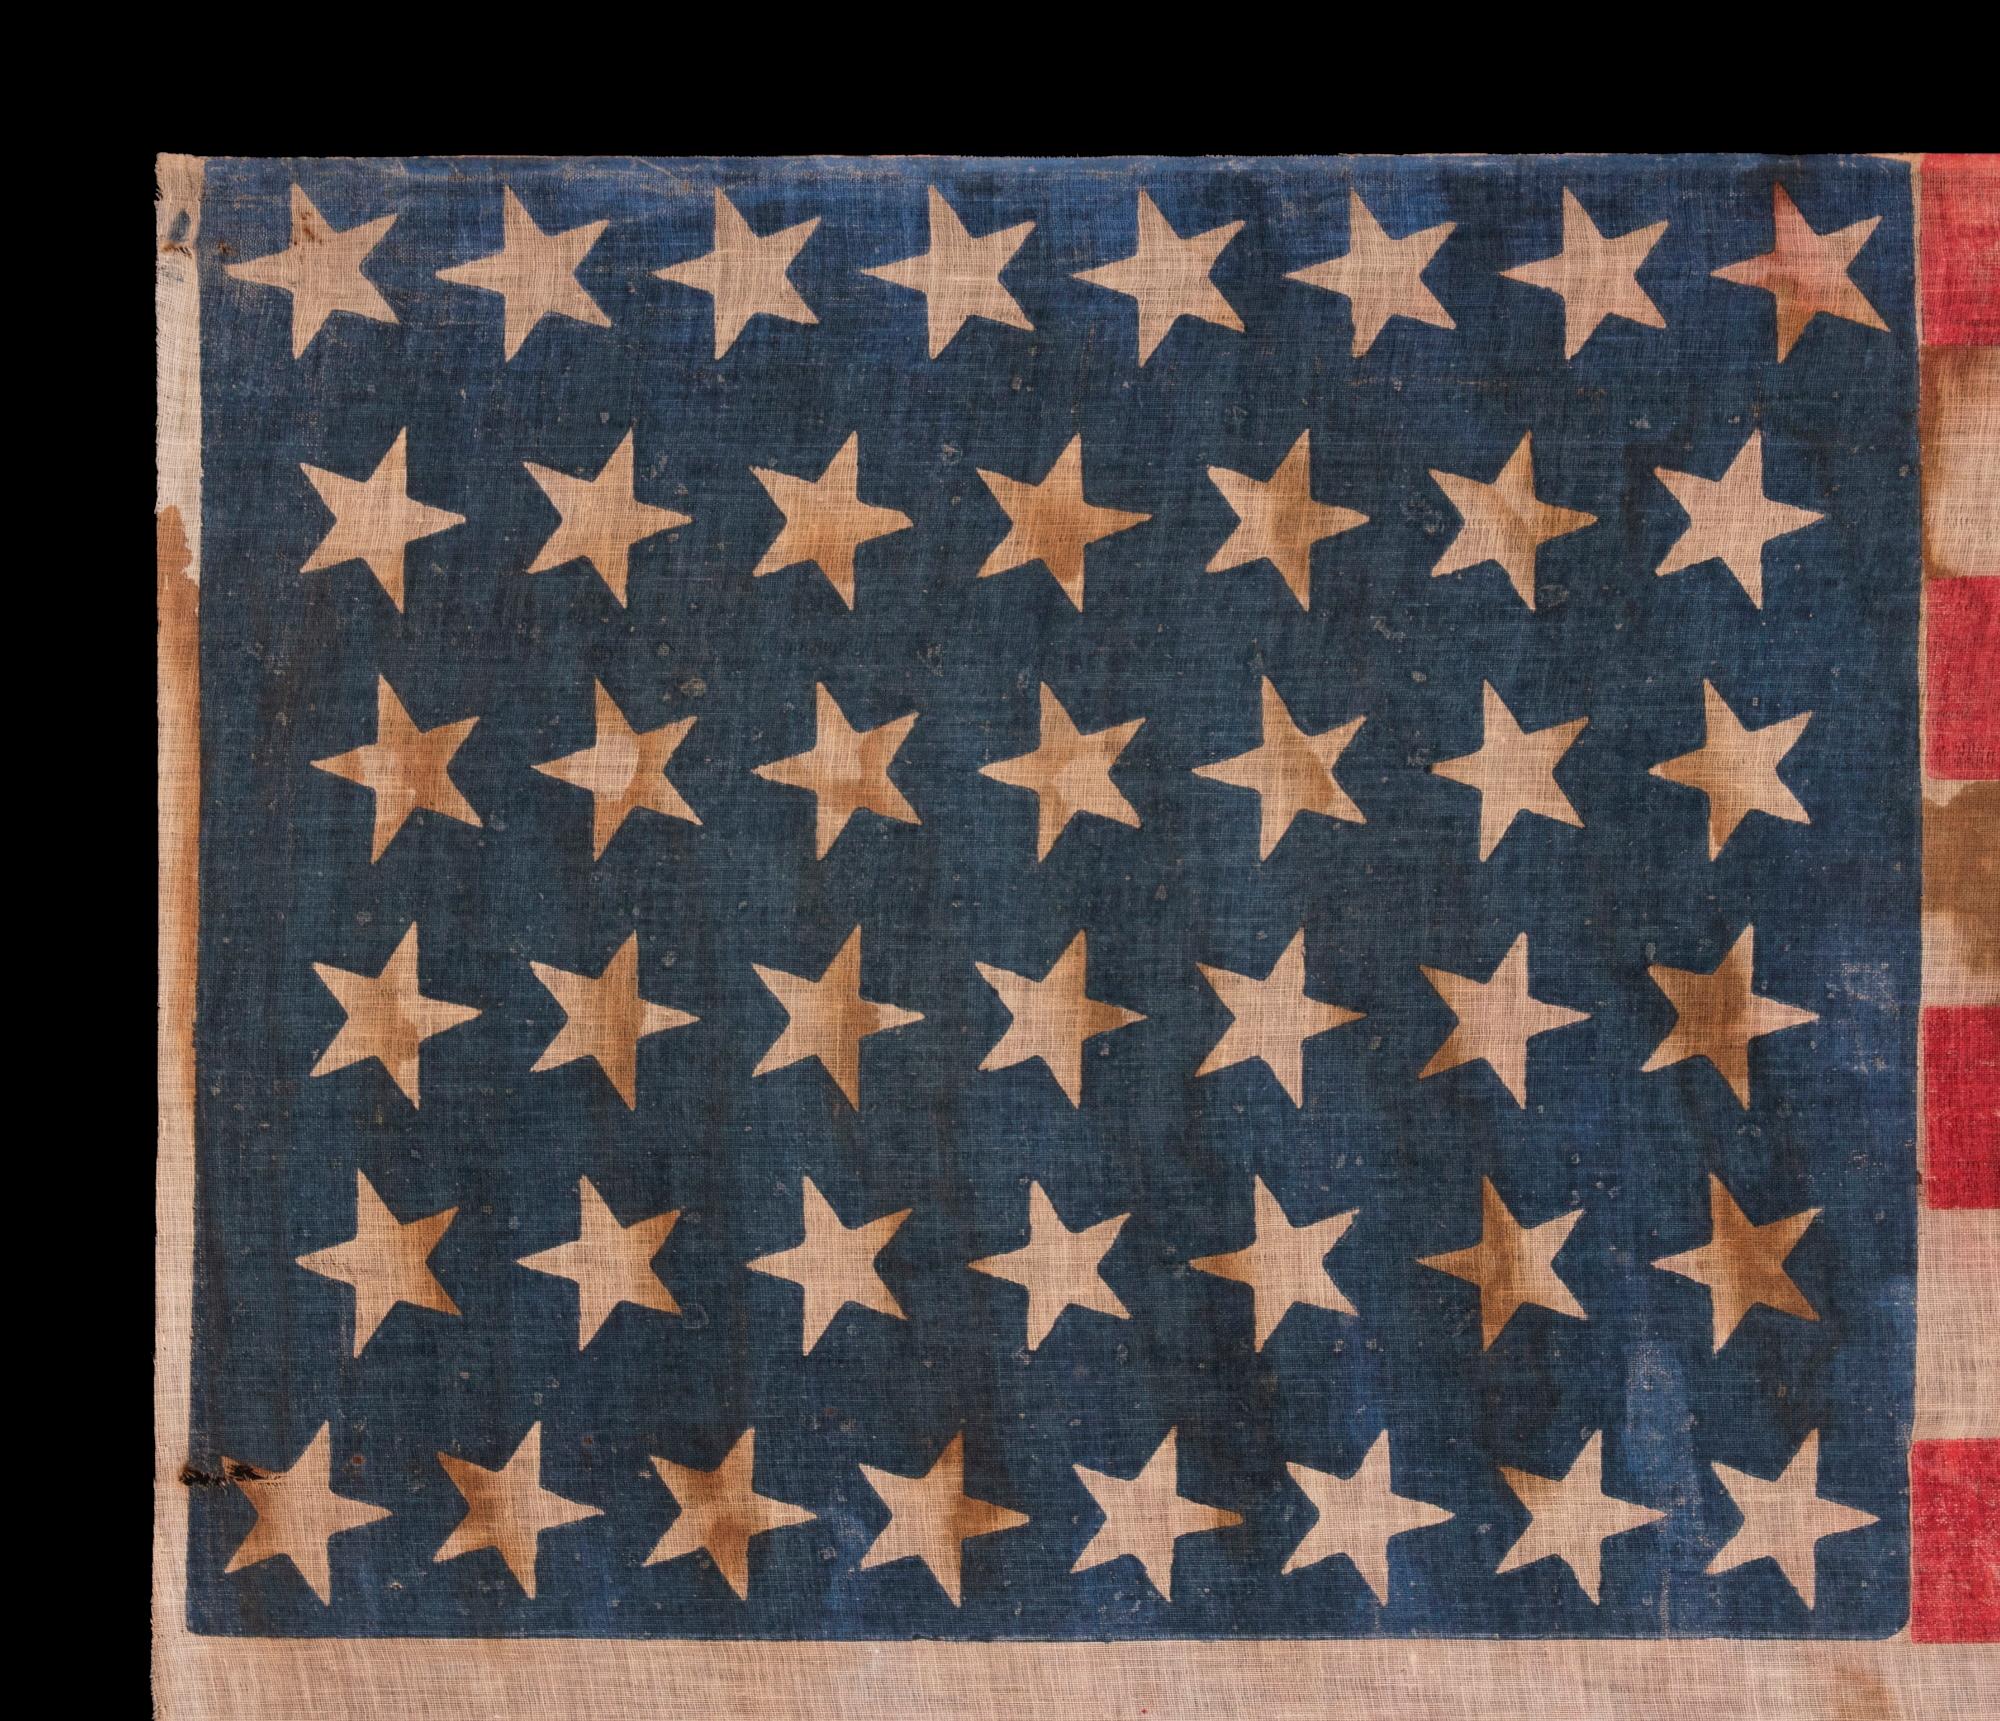 44 Star Antiques American Flag, Wyoming Statehood, ca 1890-1896 In Good Condition For Sale In York County, PA